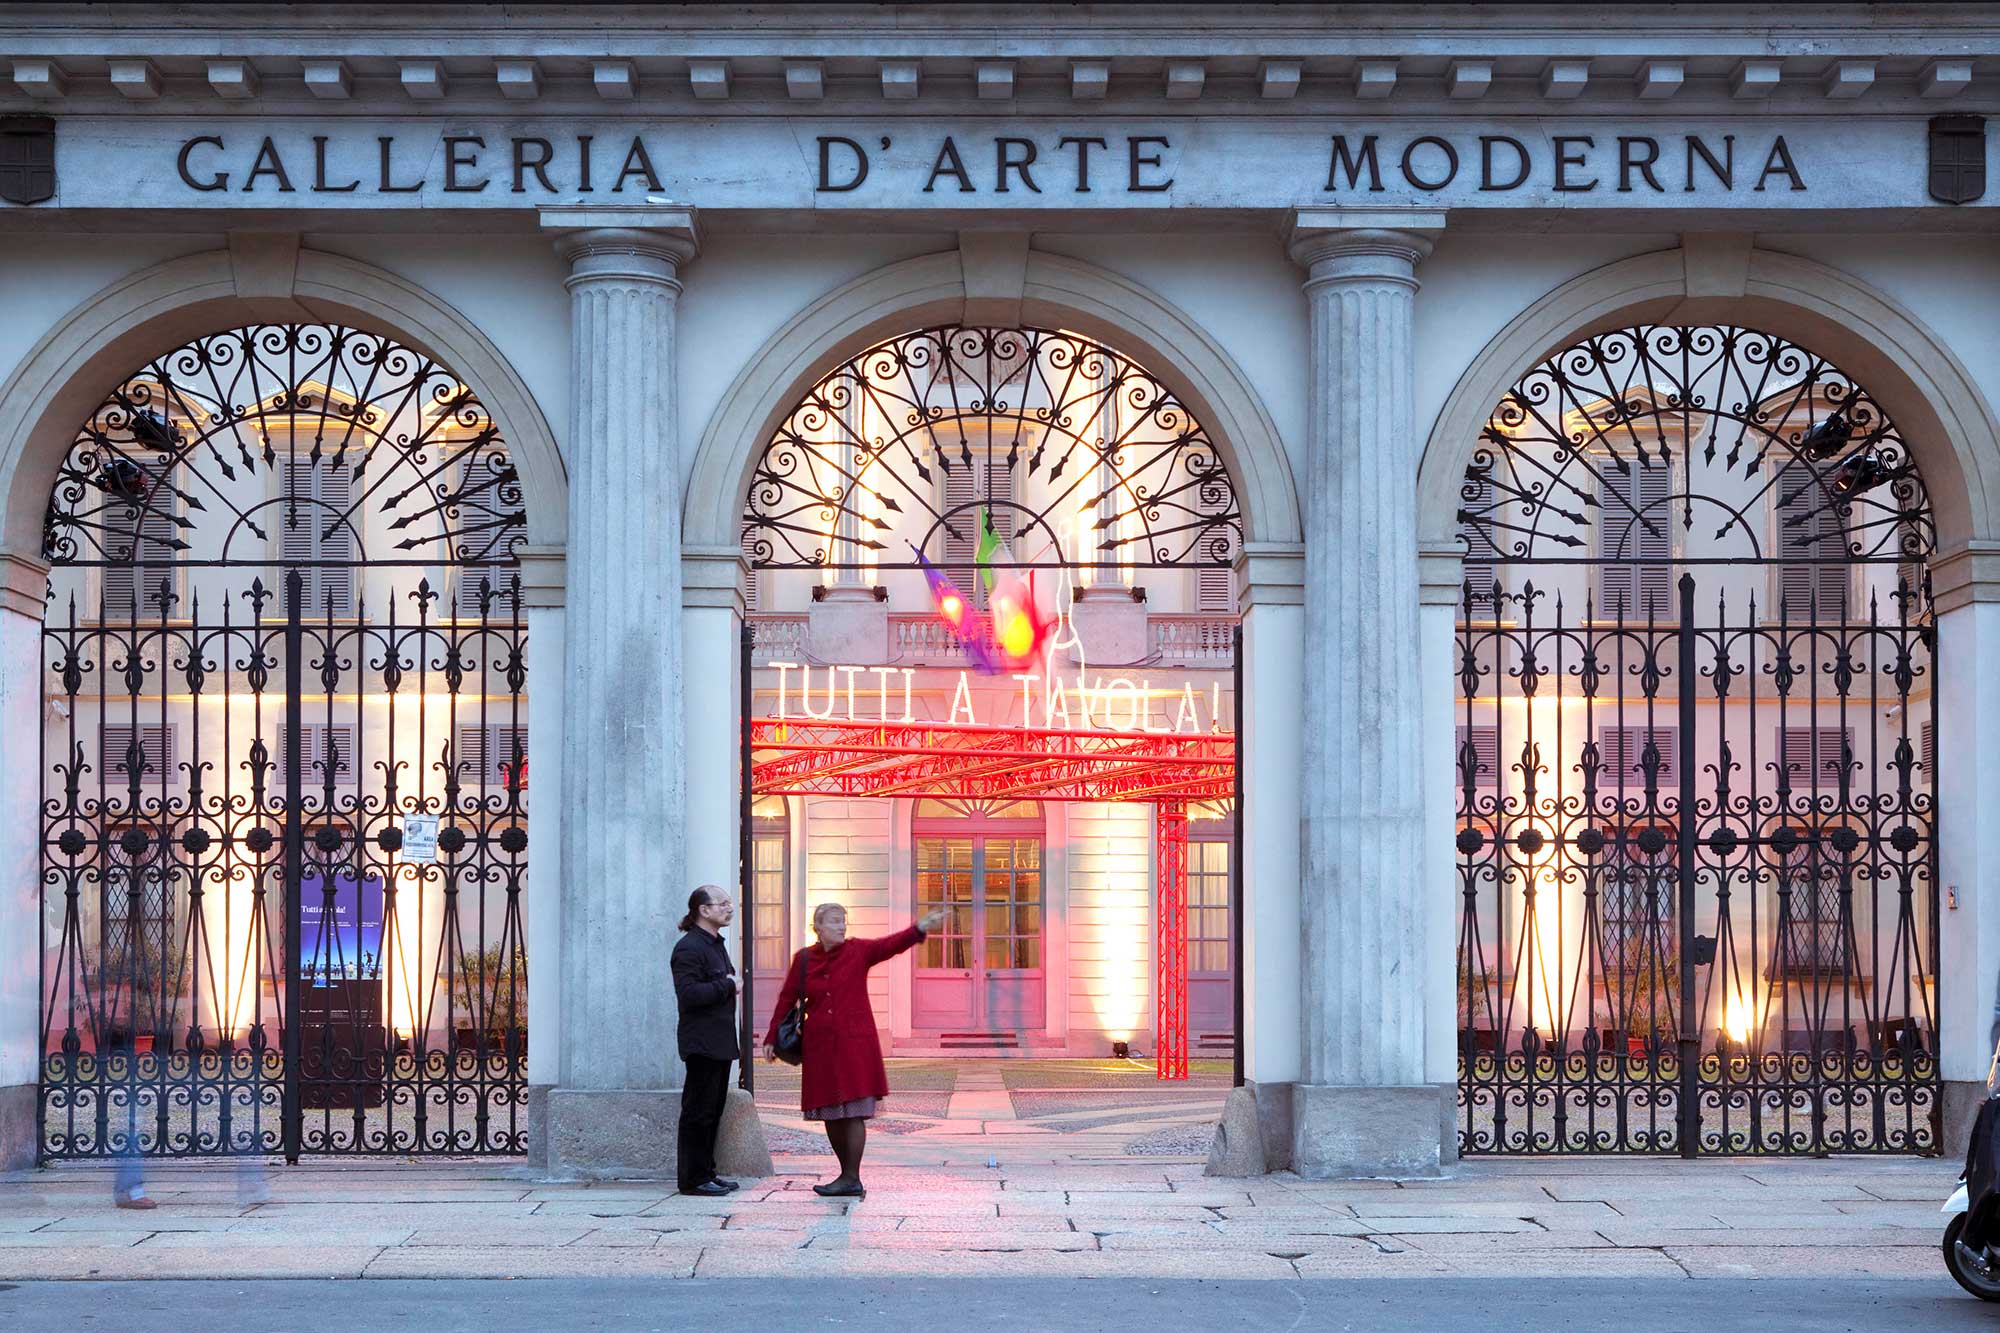 Street view of the Galleria D'Arte Moderna in Milan, with bright LED signage visible through an entranceway